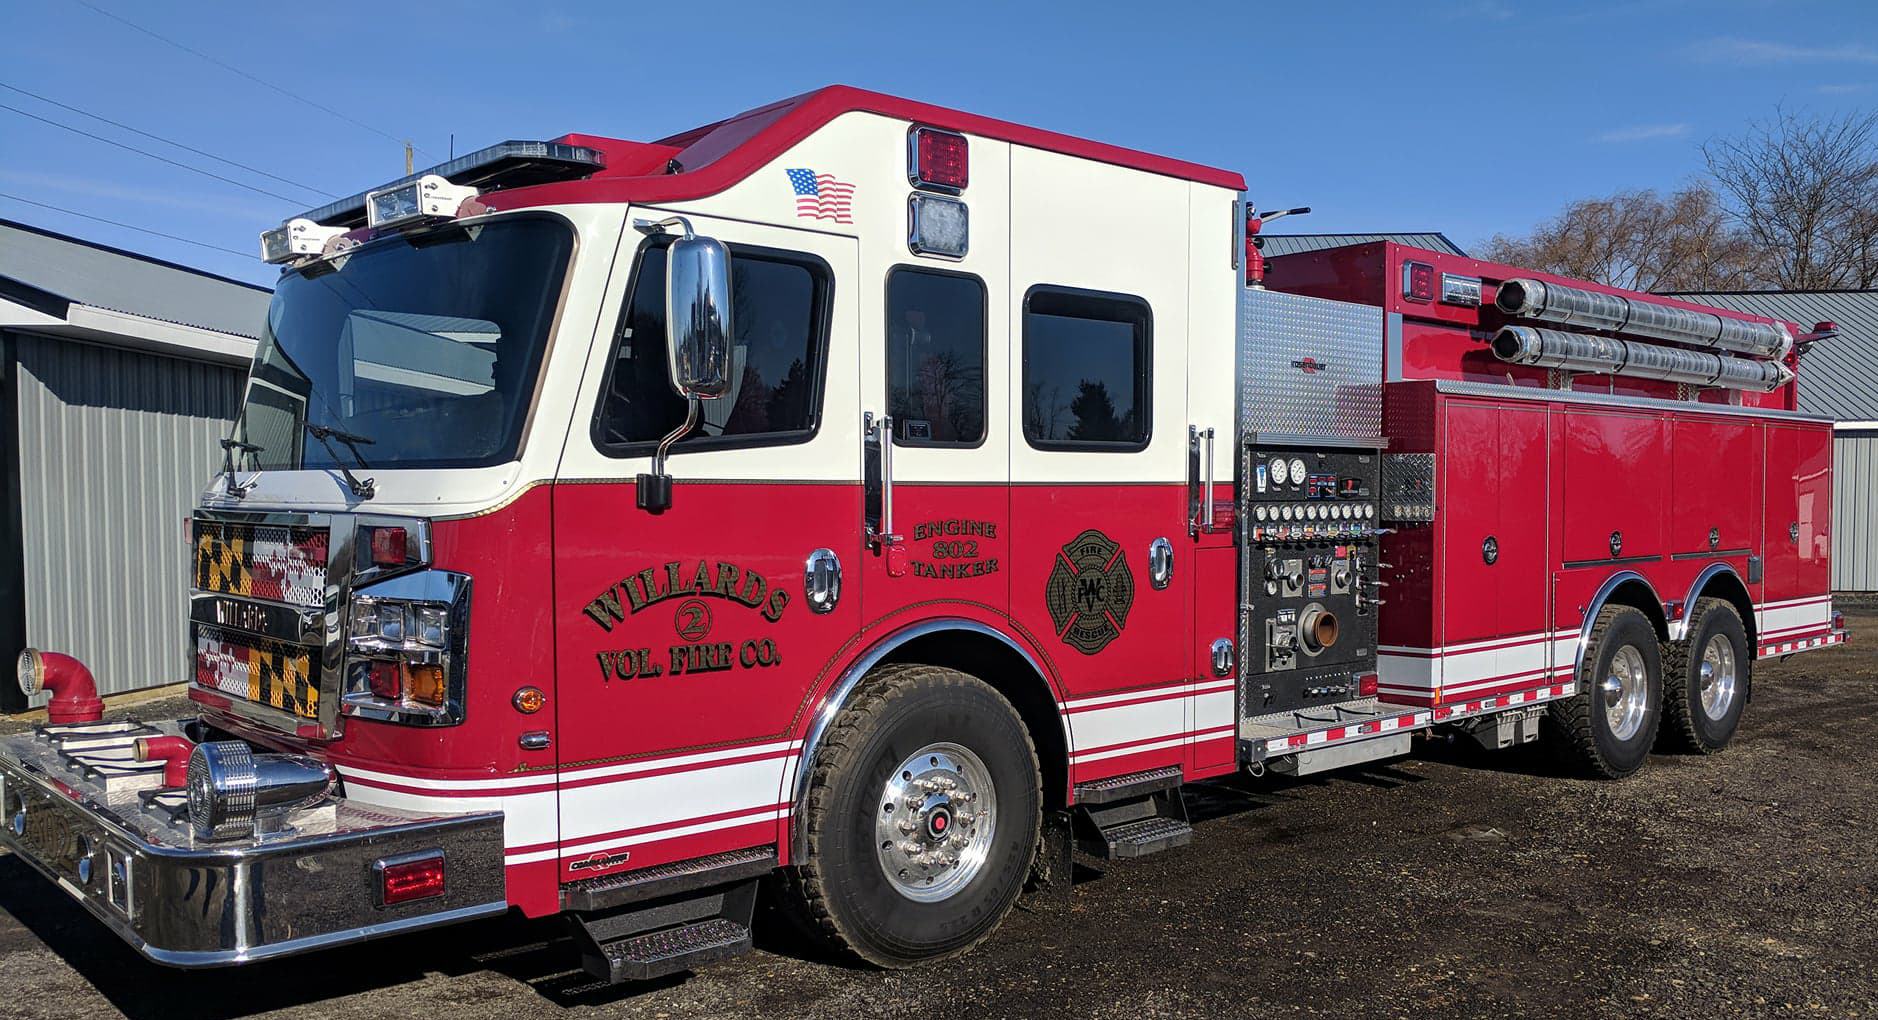 Featured image for “Willards Volunteer Fire Company orders Engine Tanker”